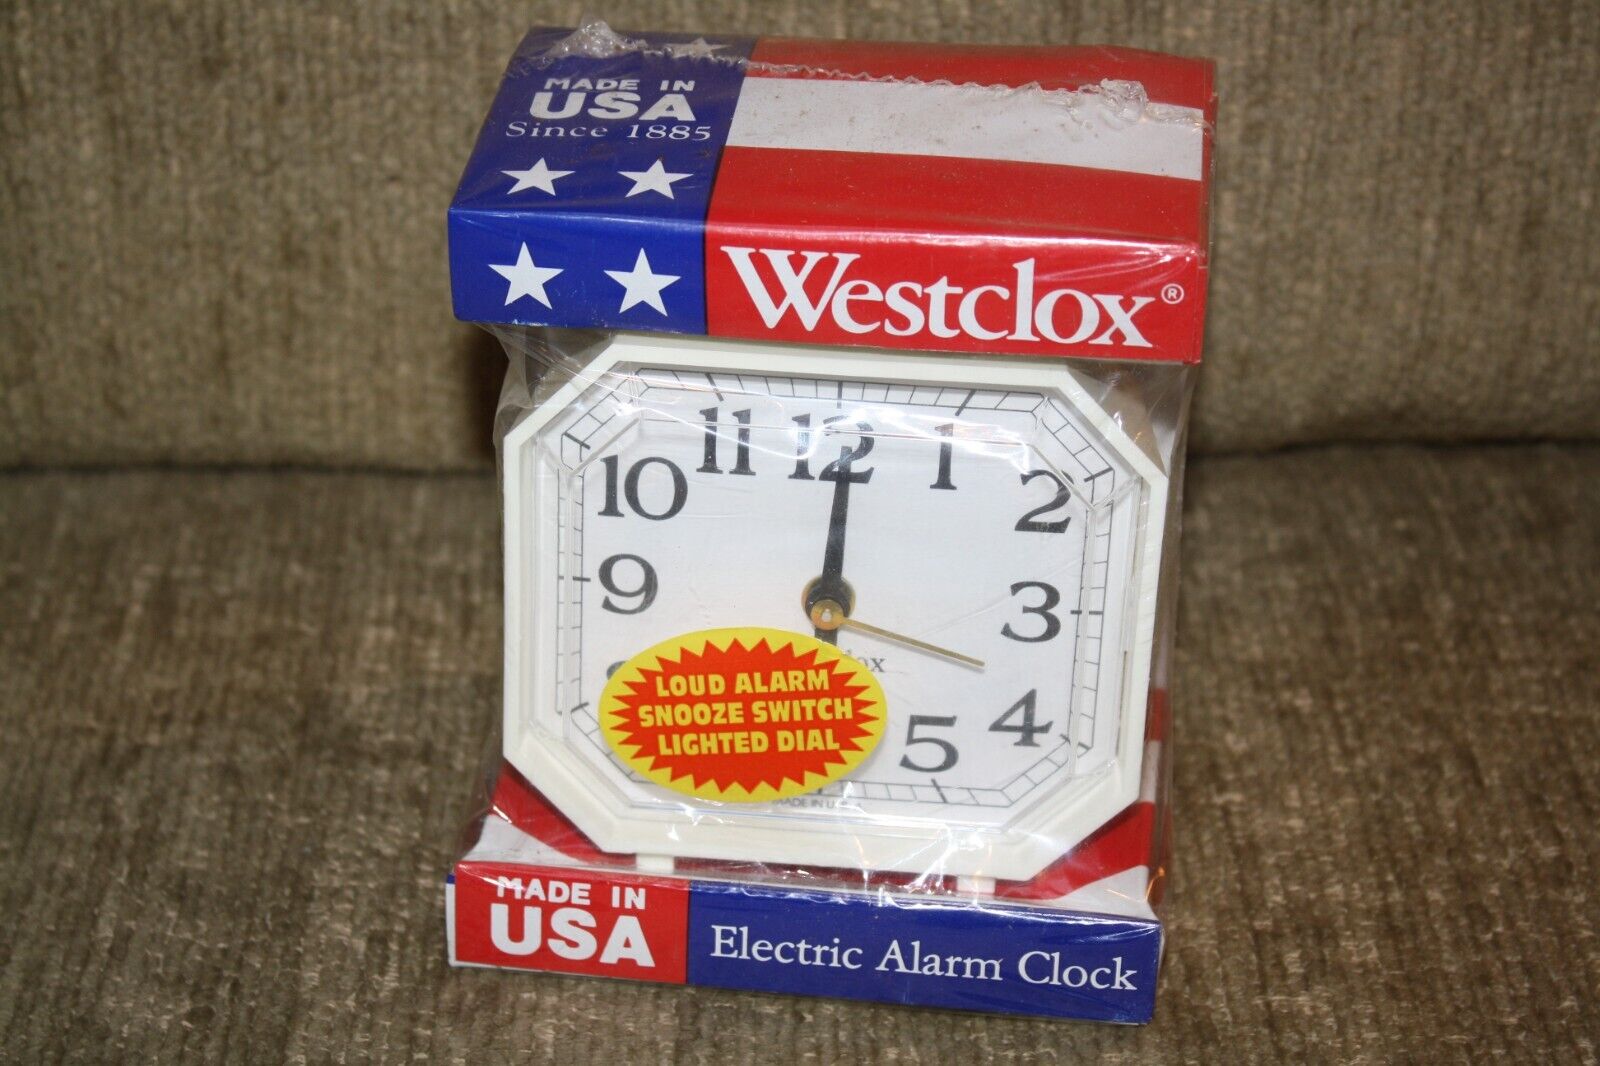 NEW & SEALED Vintage Westclox Electric Alarm Clock, Factory Sealed - Made in USA